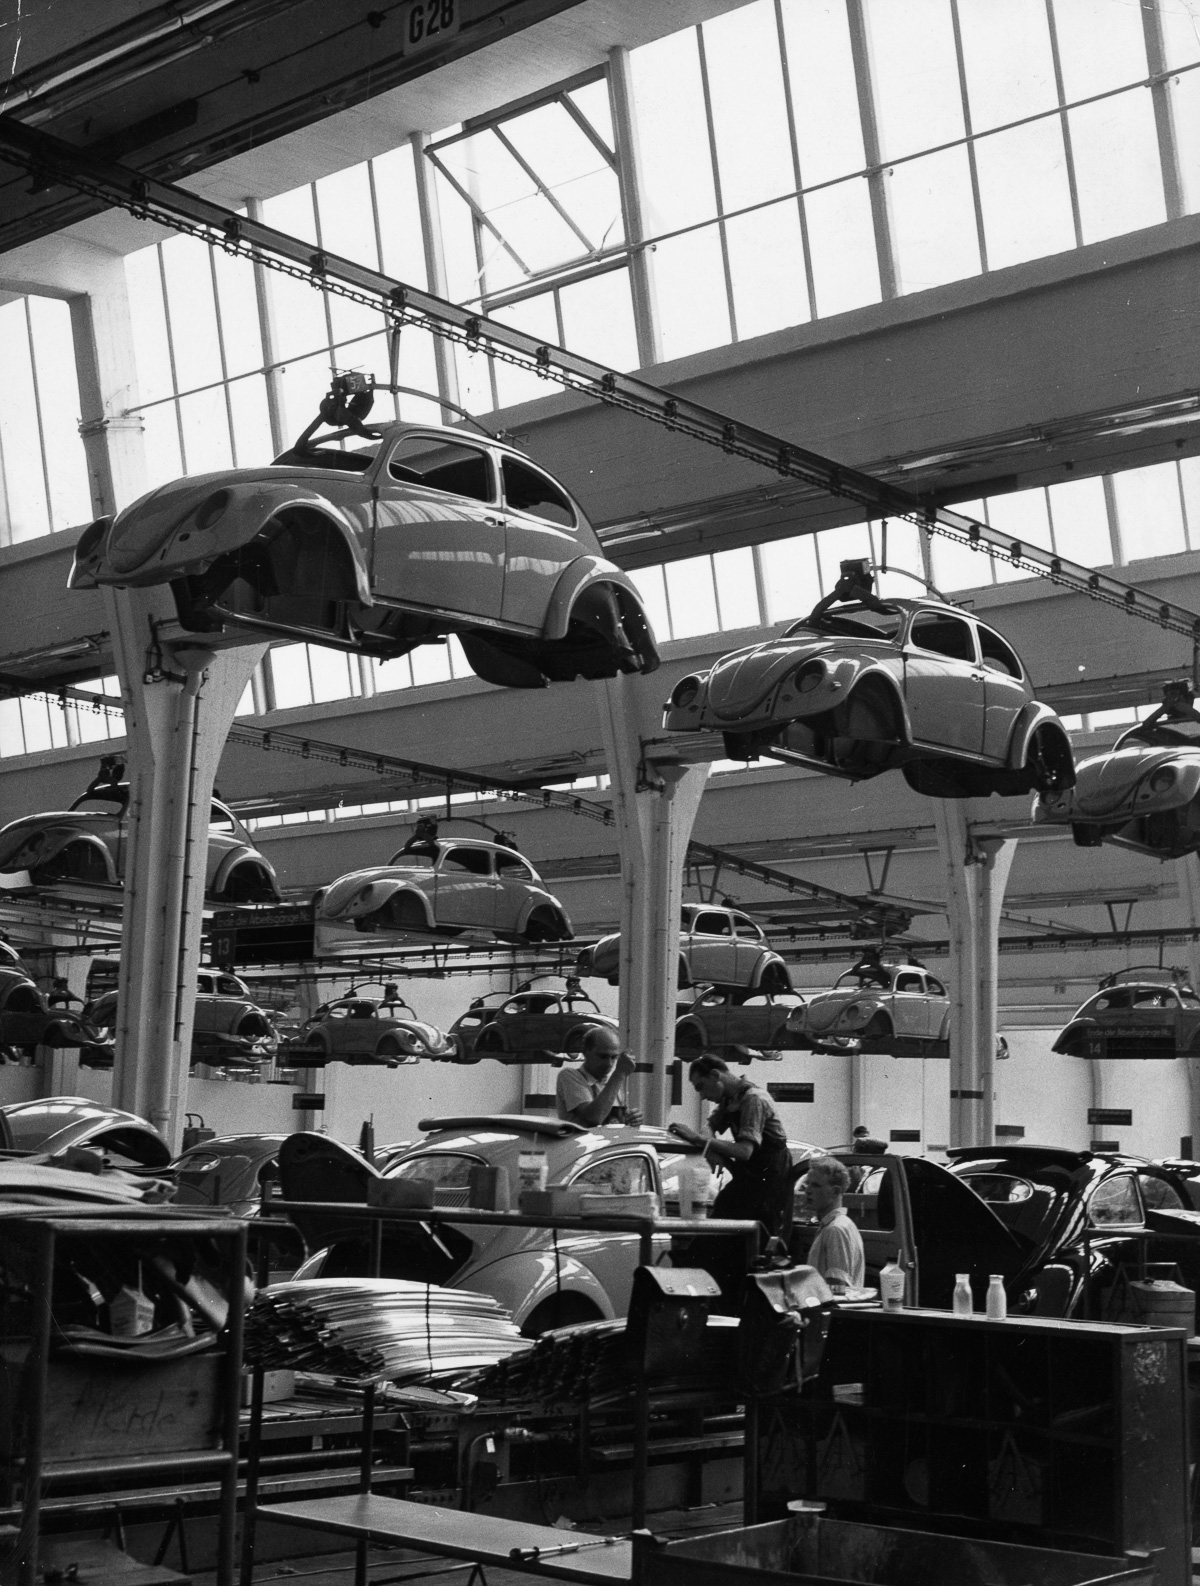 circa 1955: Workers on the production line of a Volkswagen factory at work on Beetles. (Photo by Keystone/Getty Images)